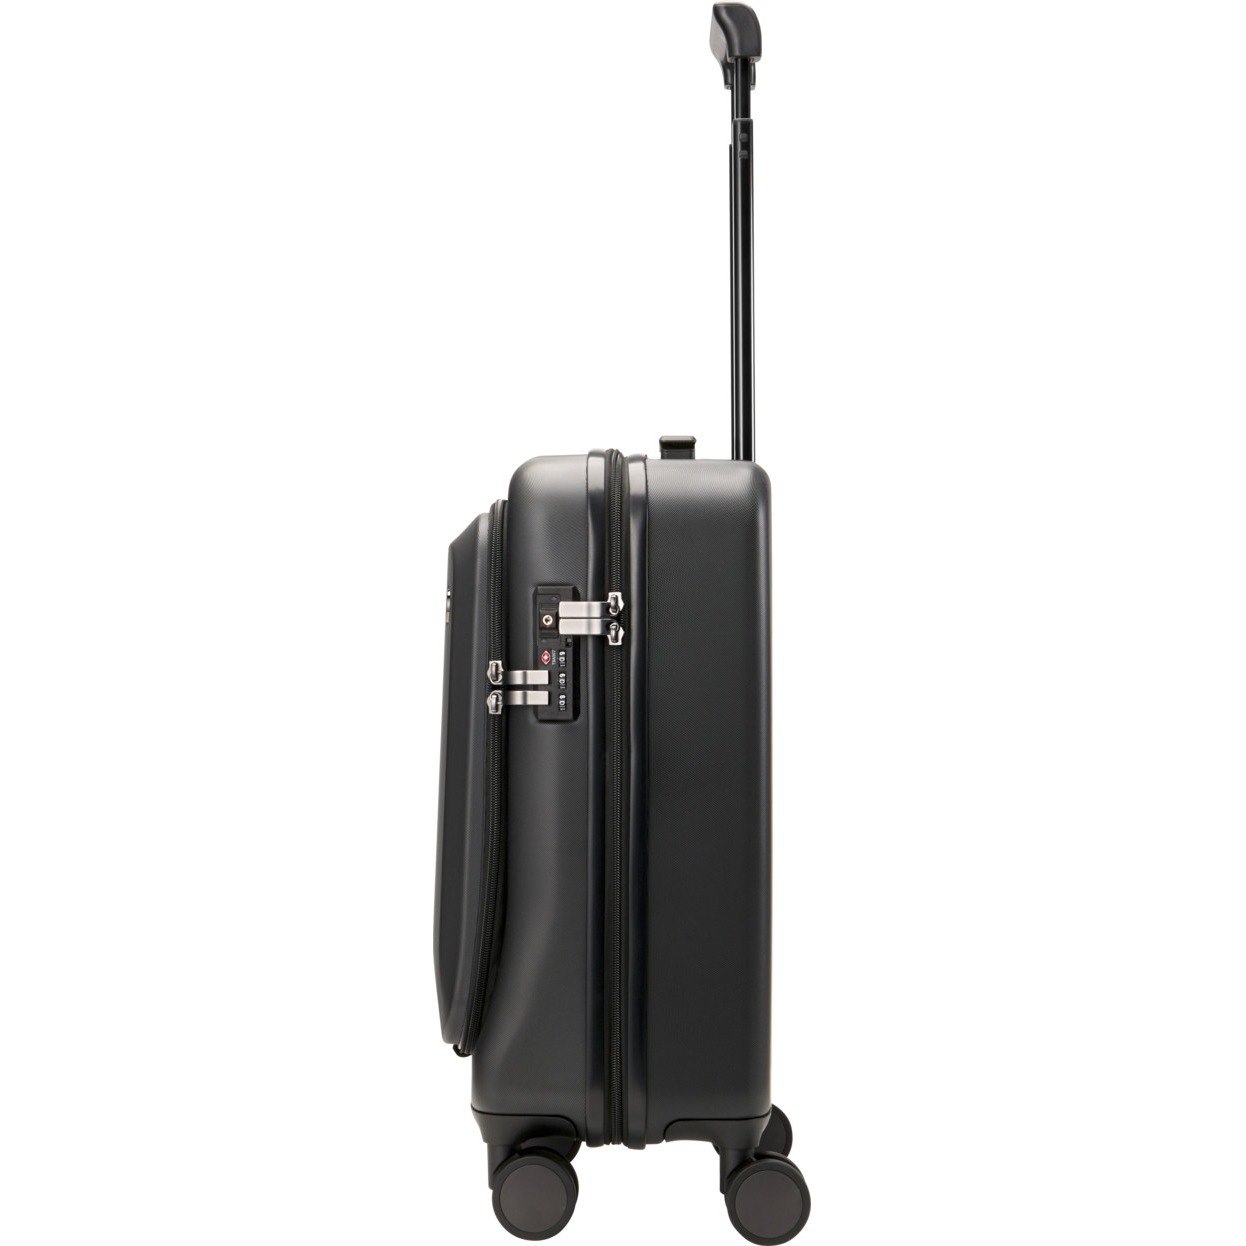 HP Travel/Luggage Case (Carry On) Luggage, Travel Essential